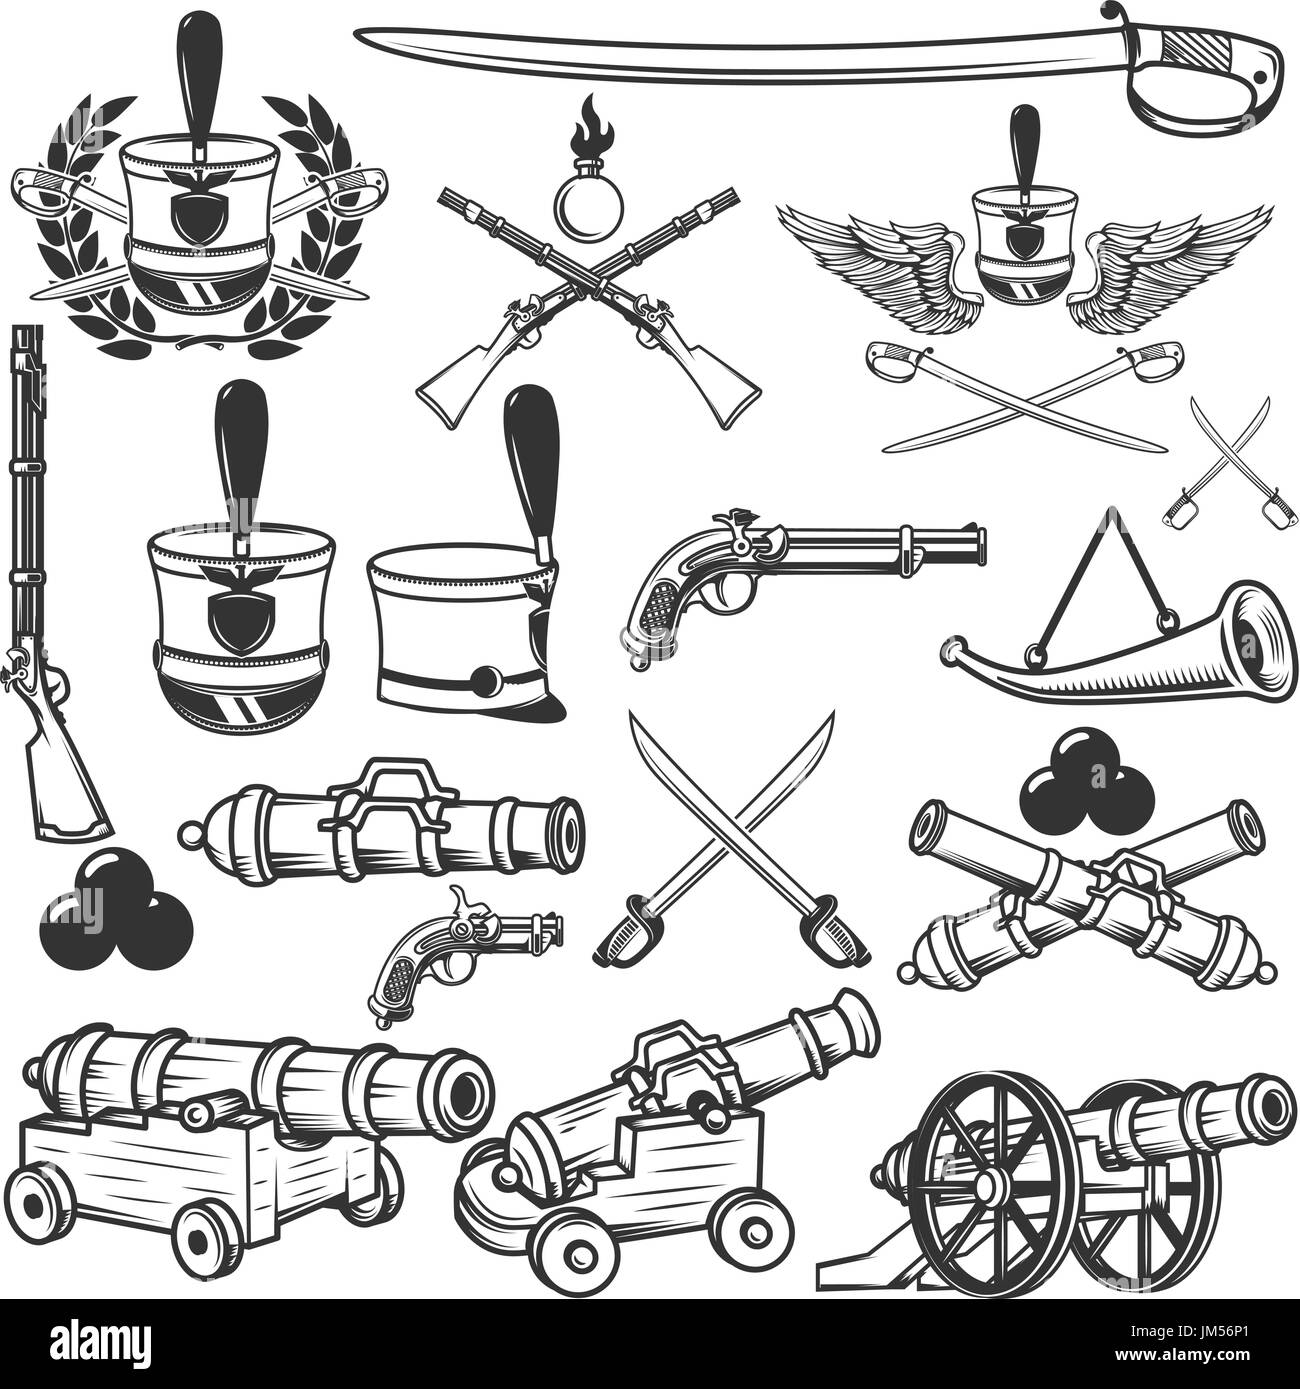 Old weapons, muskets, sabers, cannons, cores, hussar headgear. Design elements for logo, label, emblem, sign. Vector illustration Stock Vector